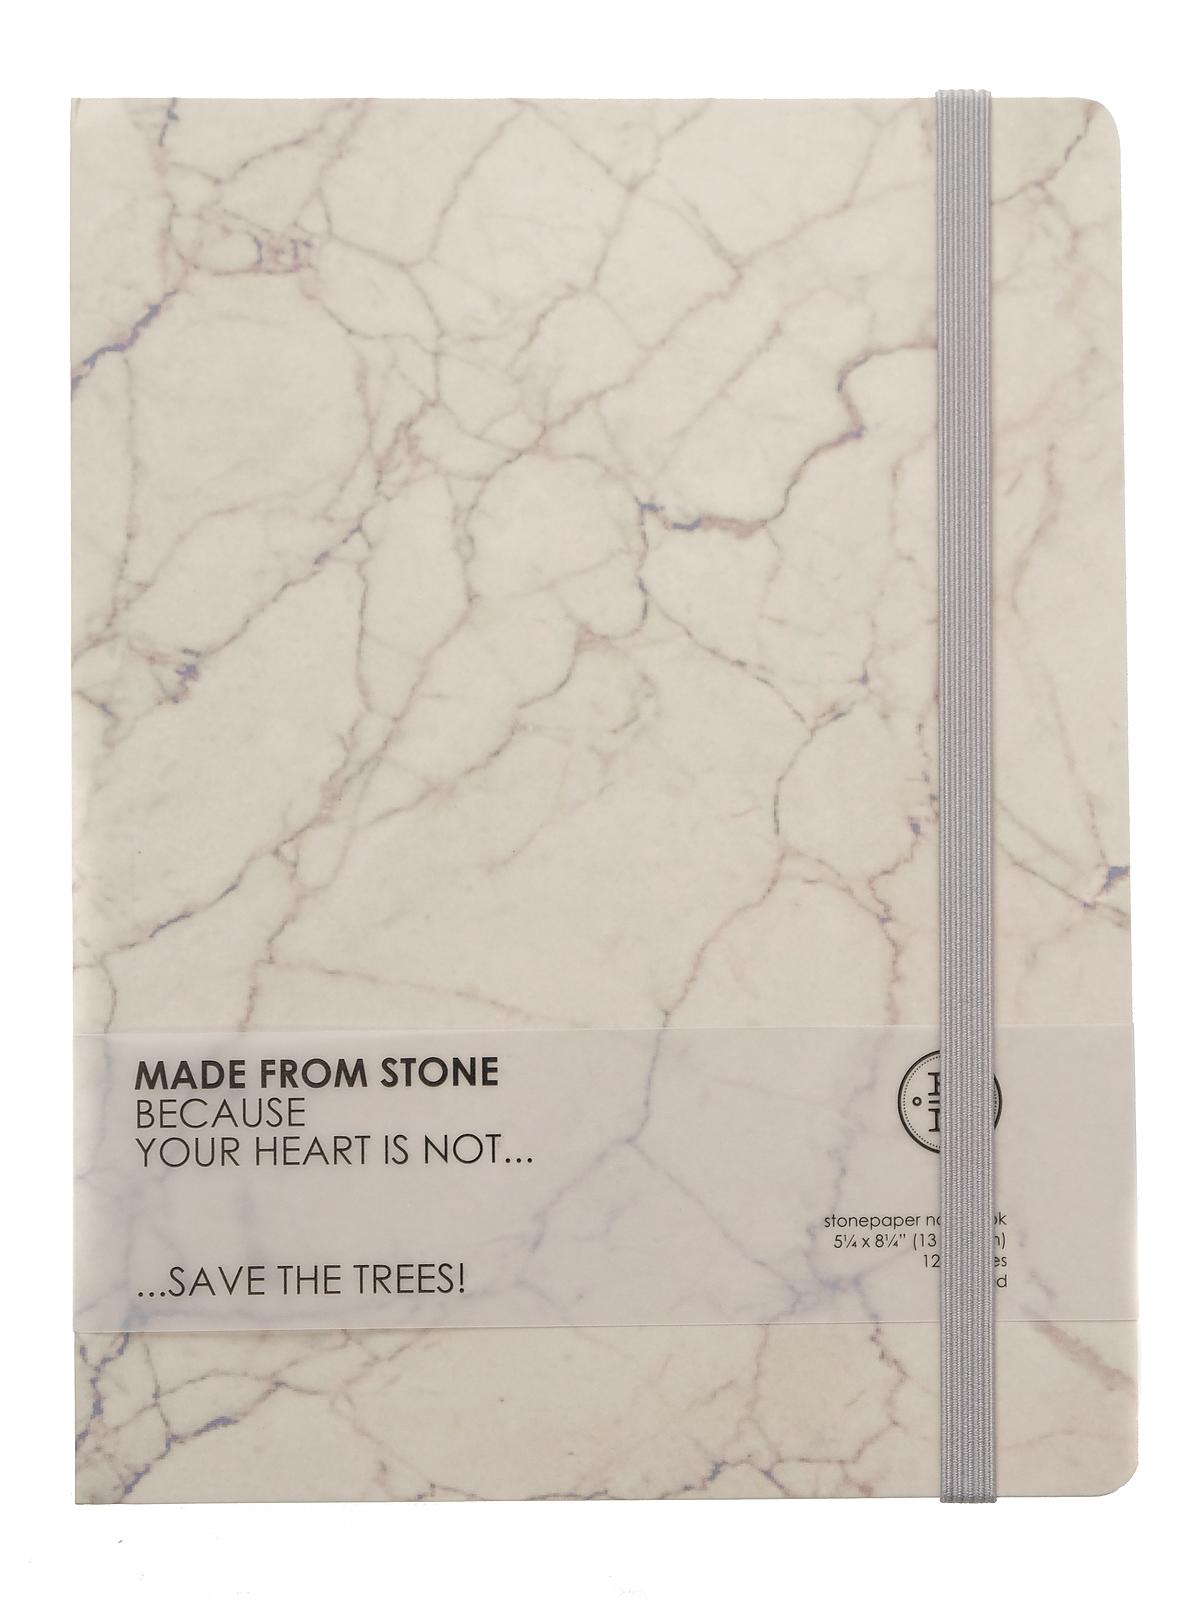 Stonepaper Notebooks Ivory 5 1 4 In. X 8 1 4 In. 128 Pages, Lined